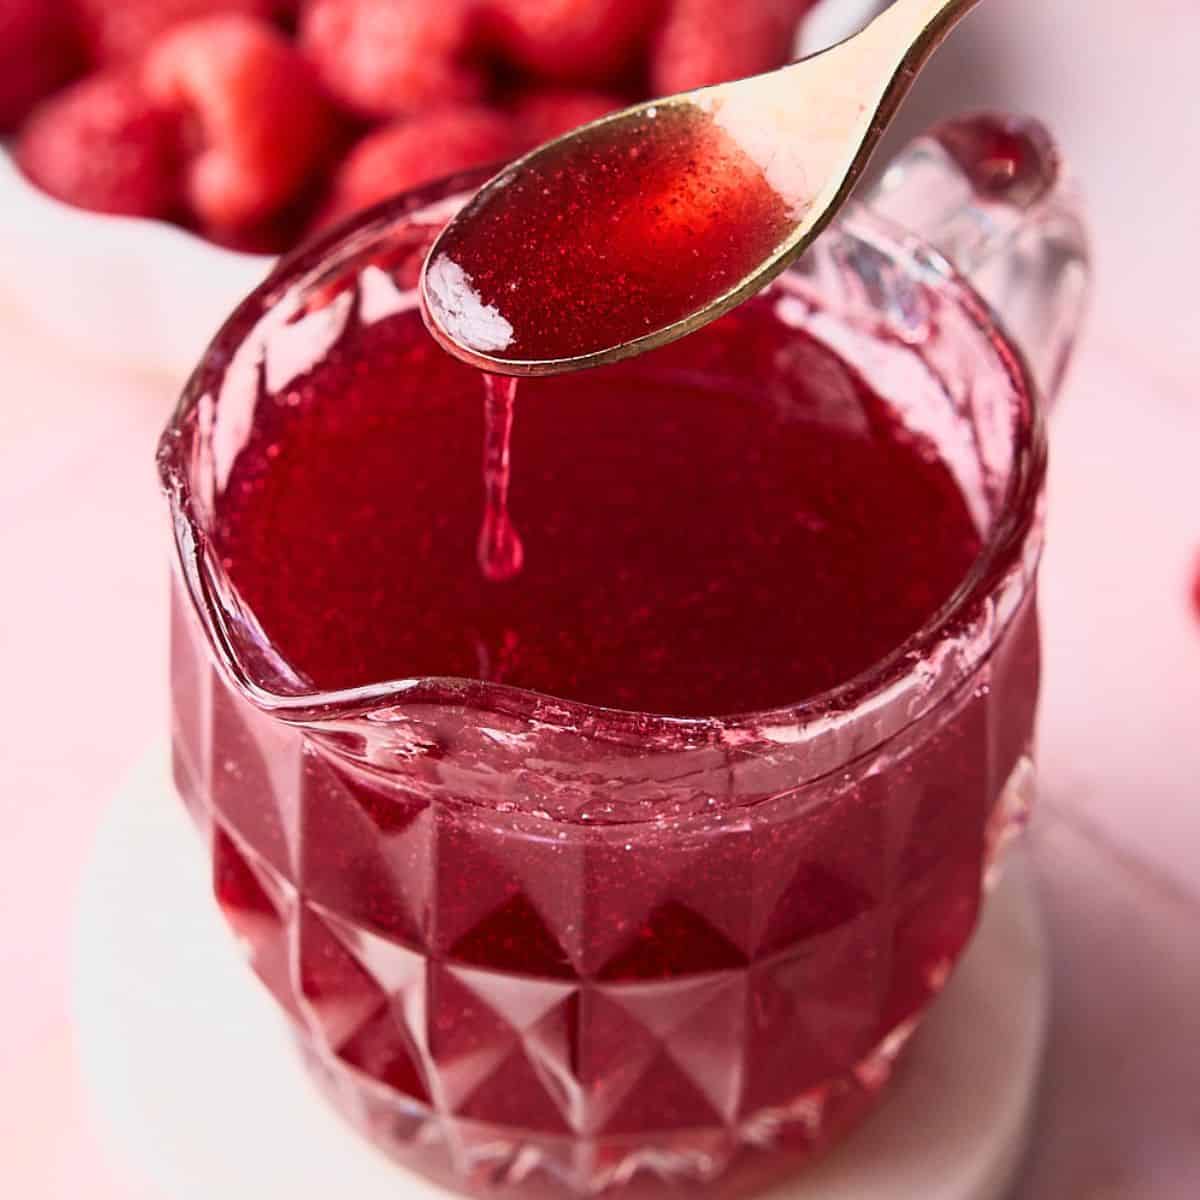 Delicious raspberry syrup held on a golden spoon.